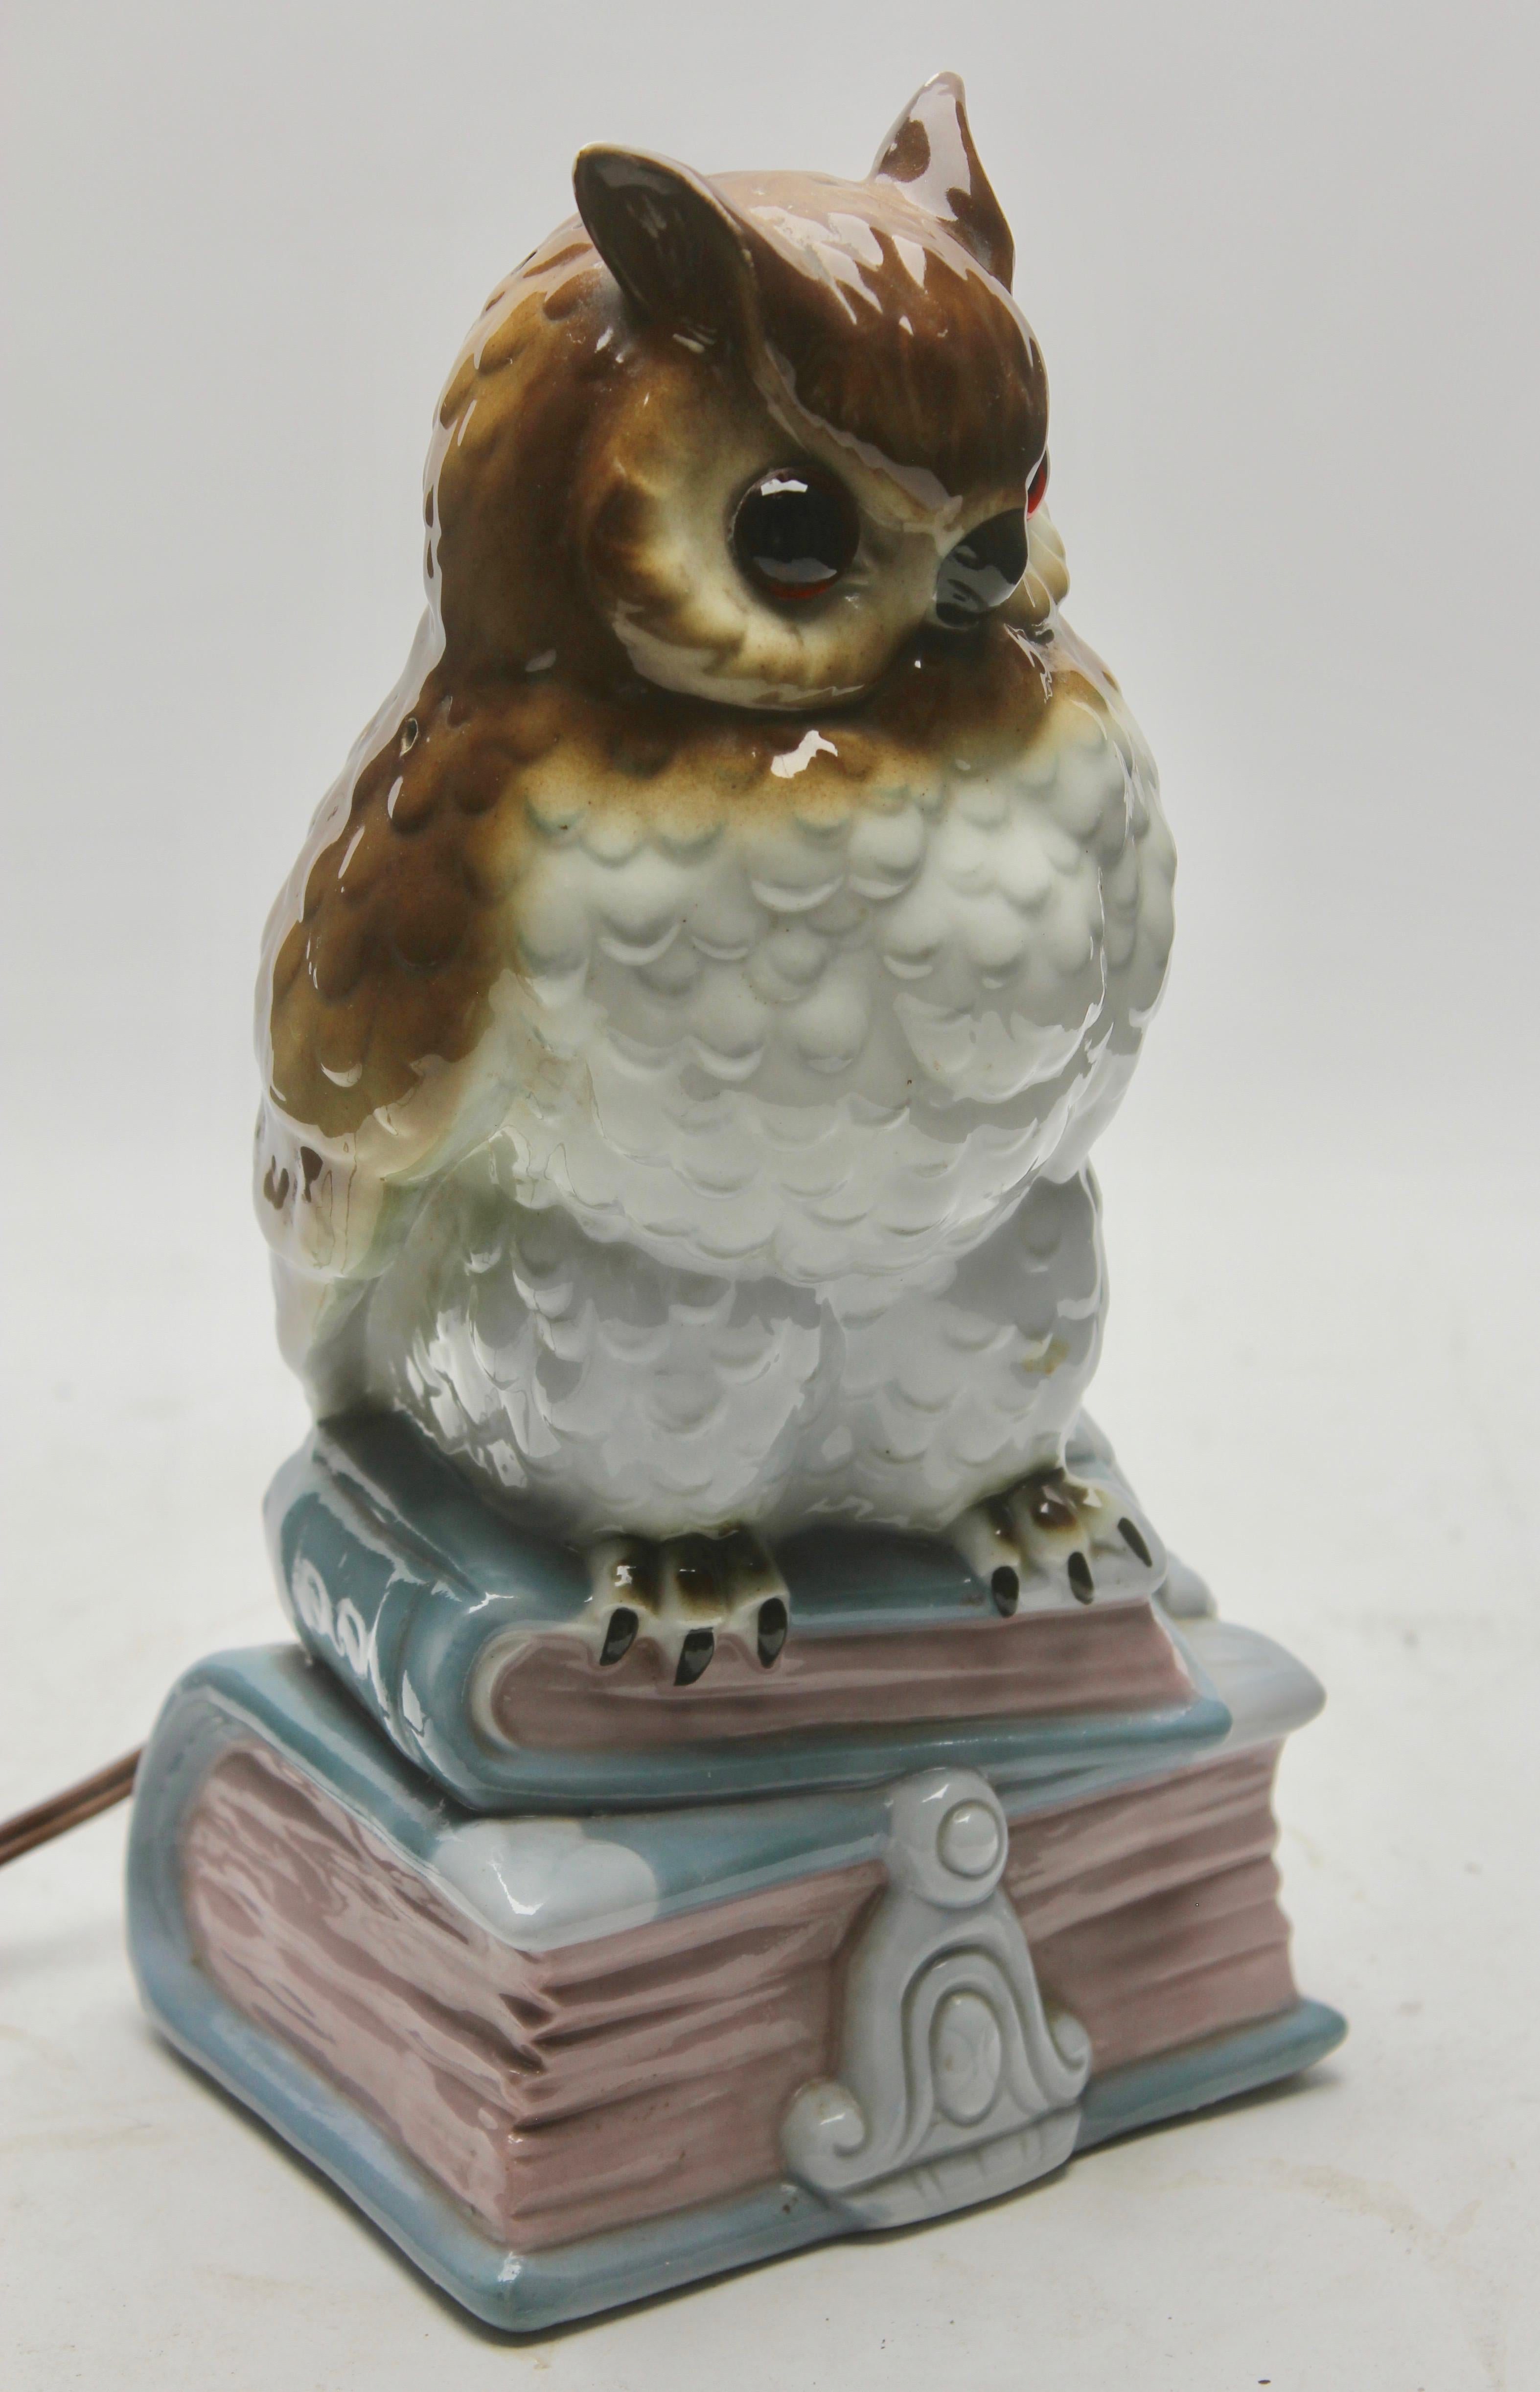 Porcelain Figurine, Air Purifier or Table Lamp, Owl or Eagle Owl from the 1930 For Sale 1